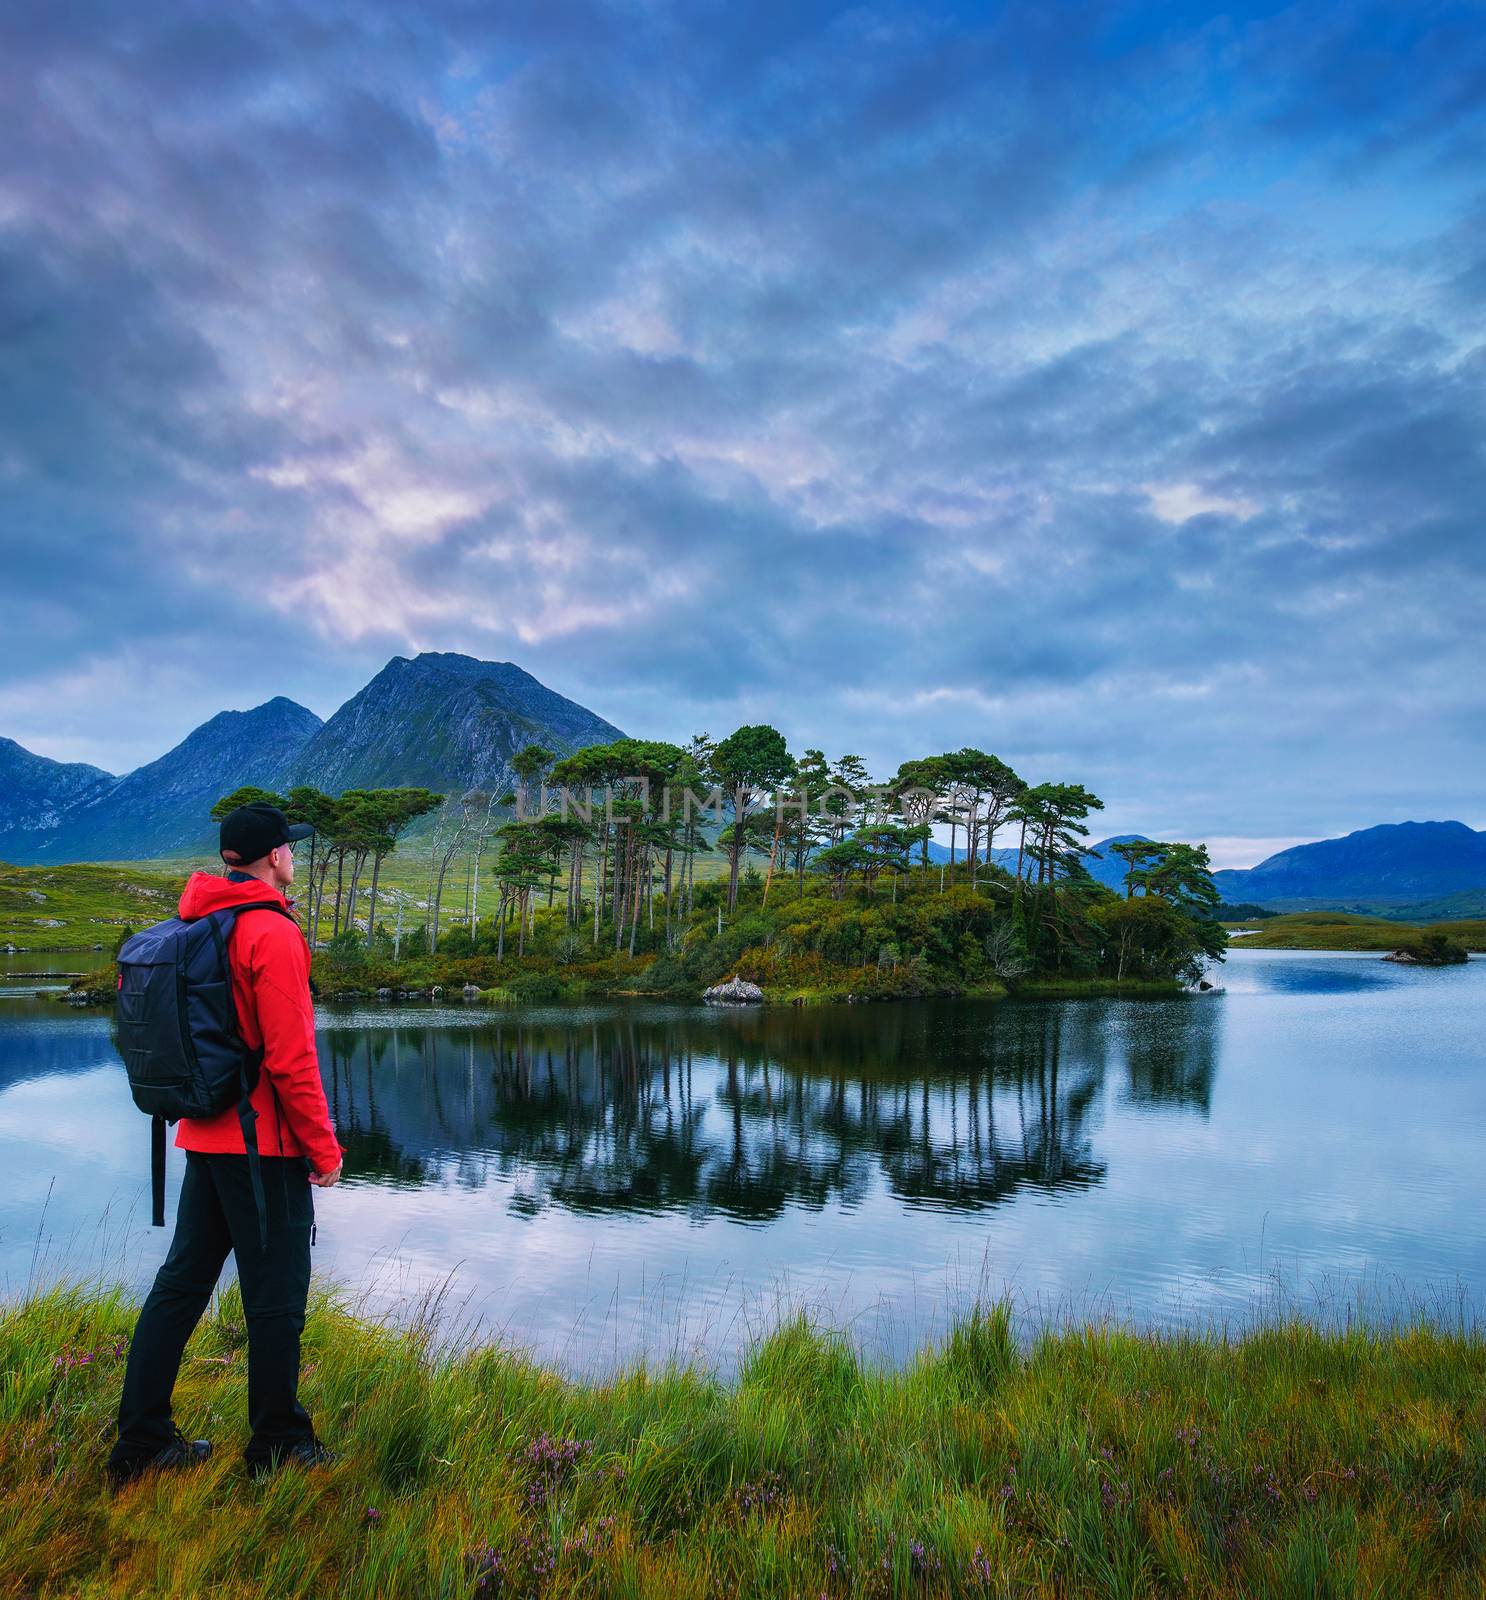 Young hiker with a backpack looking at the Pine Island in Derryclare Lough, Galway county, Ireland